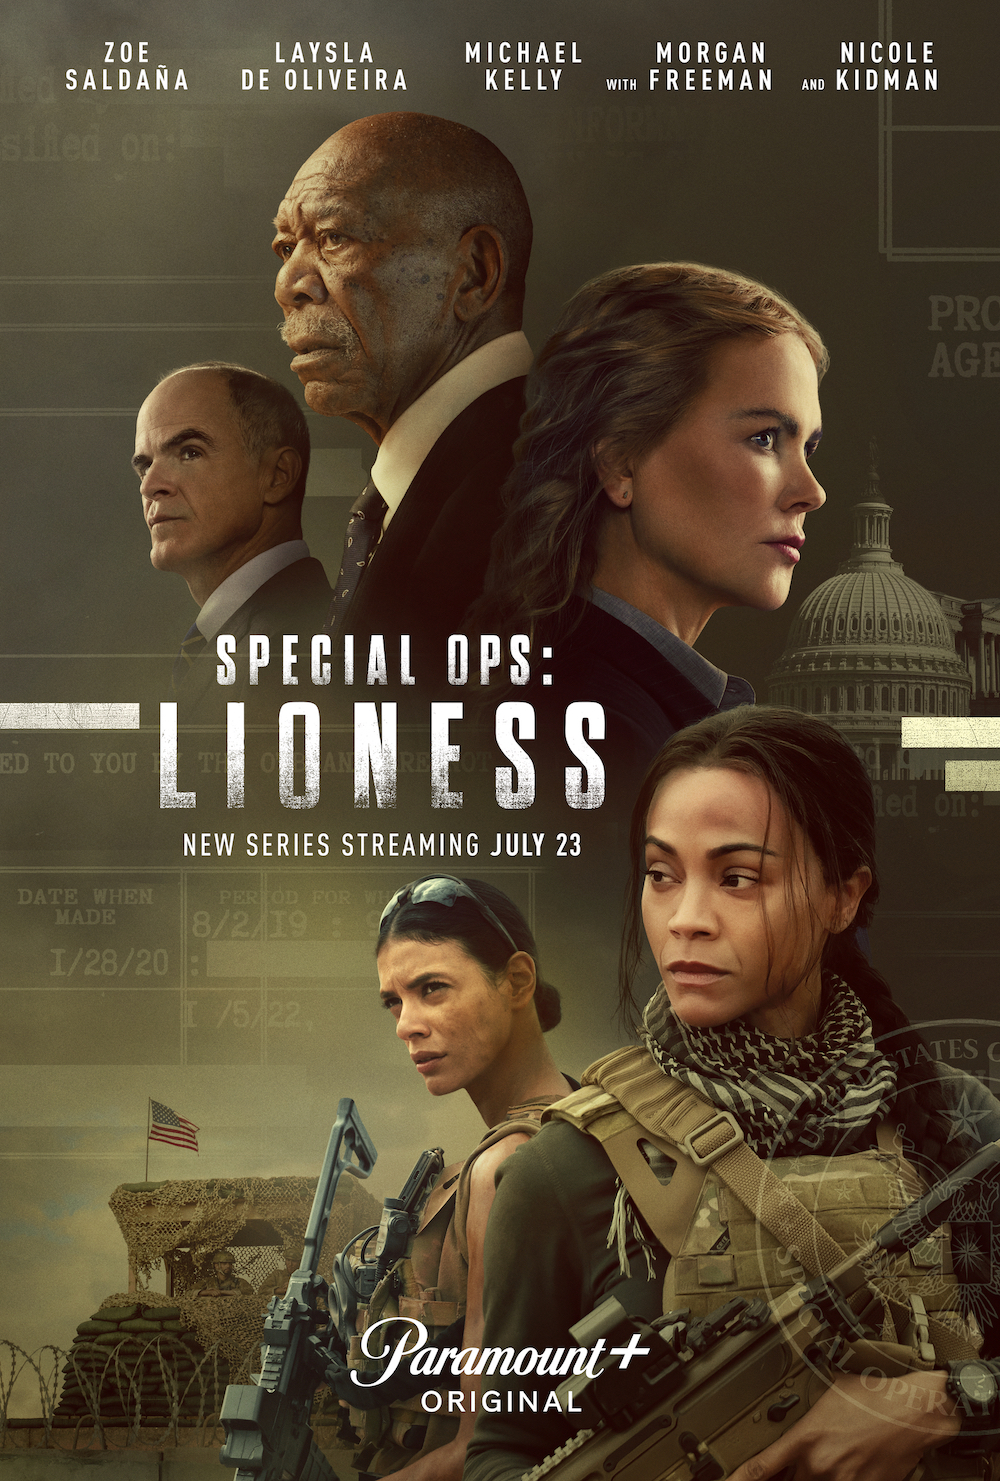 'Special Ops Lioness' Trailer Freeman Has Questions About CIA